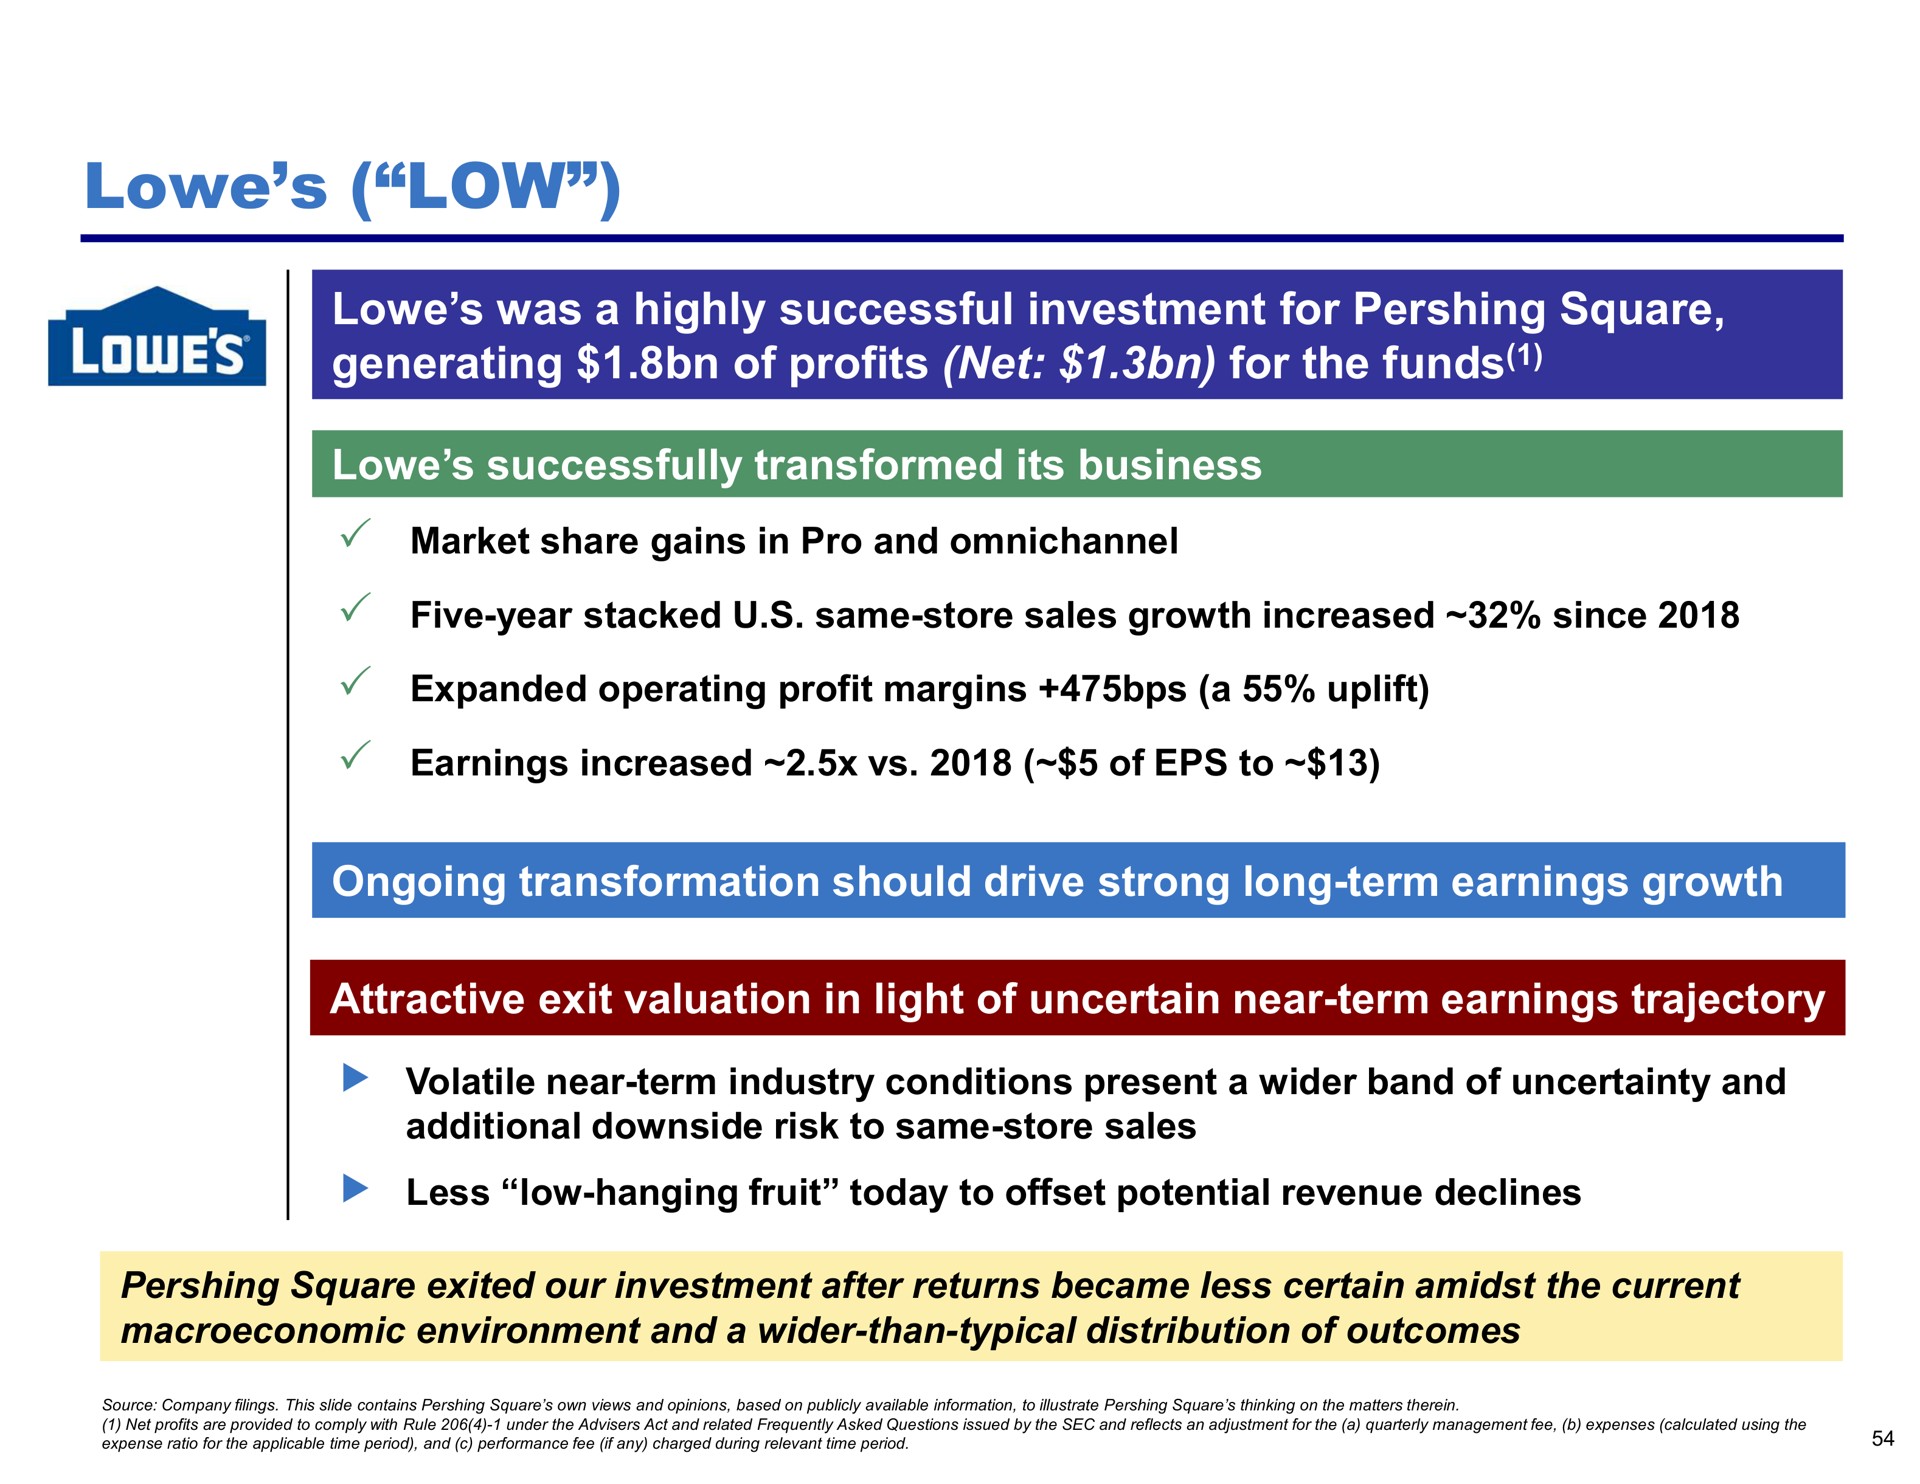 low was a highly successful investment for square generating of profits net for the funds | Pershing Square